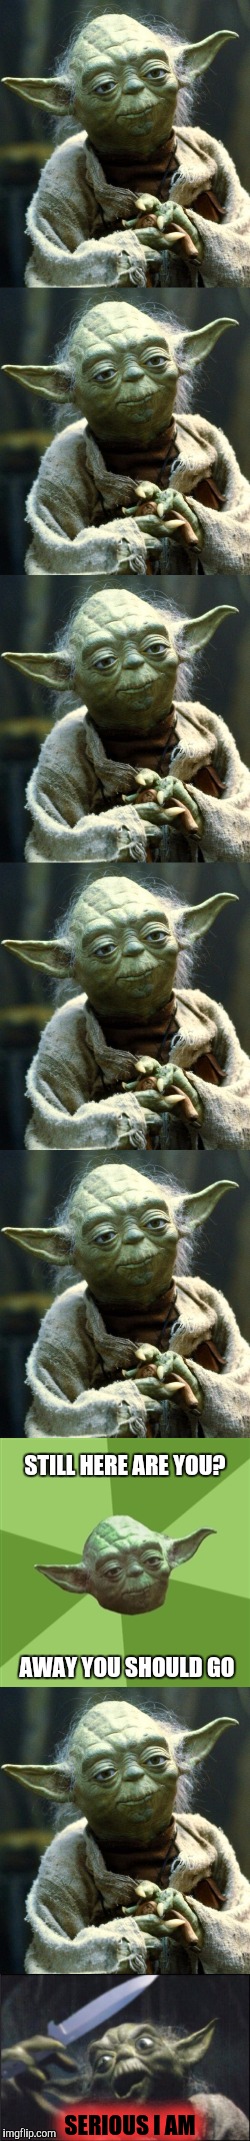 Never Bother Yoda When He Has a Knife | STILL HERE ARE YOU? AWAY YOU SHOULD GO; SERIOUS I AM | image tagged in yoda,star wars yoda,advice yoda,yoda wisdom,front page,hall of fame | made w/ Imgflip meme maker